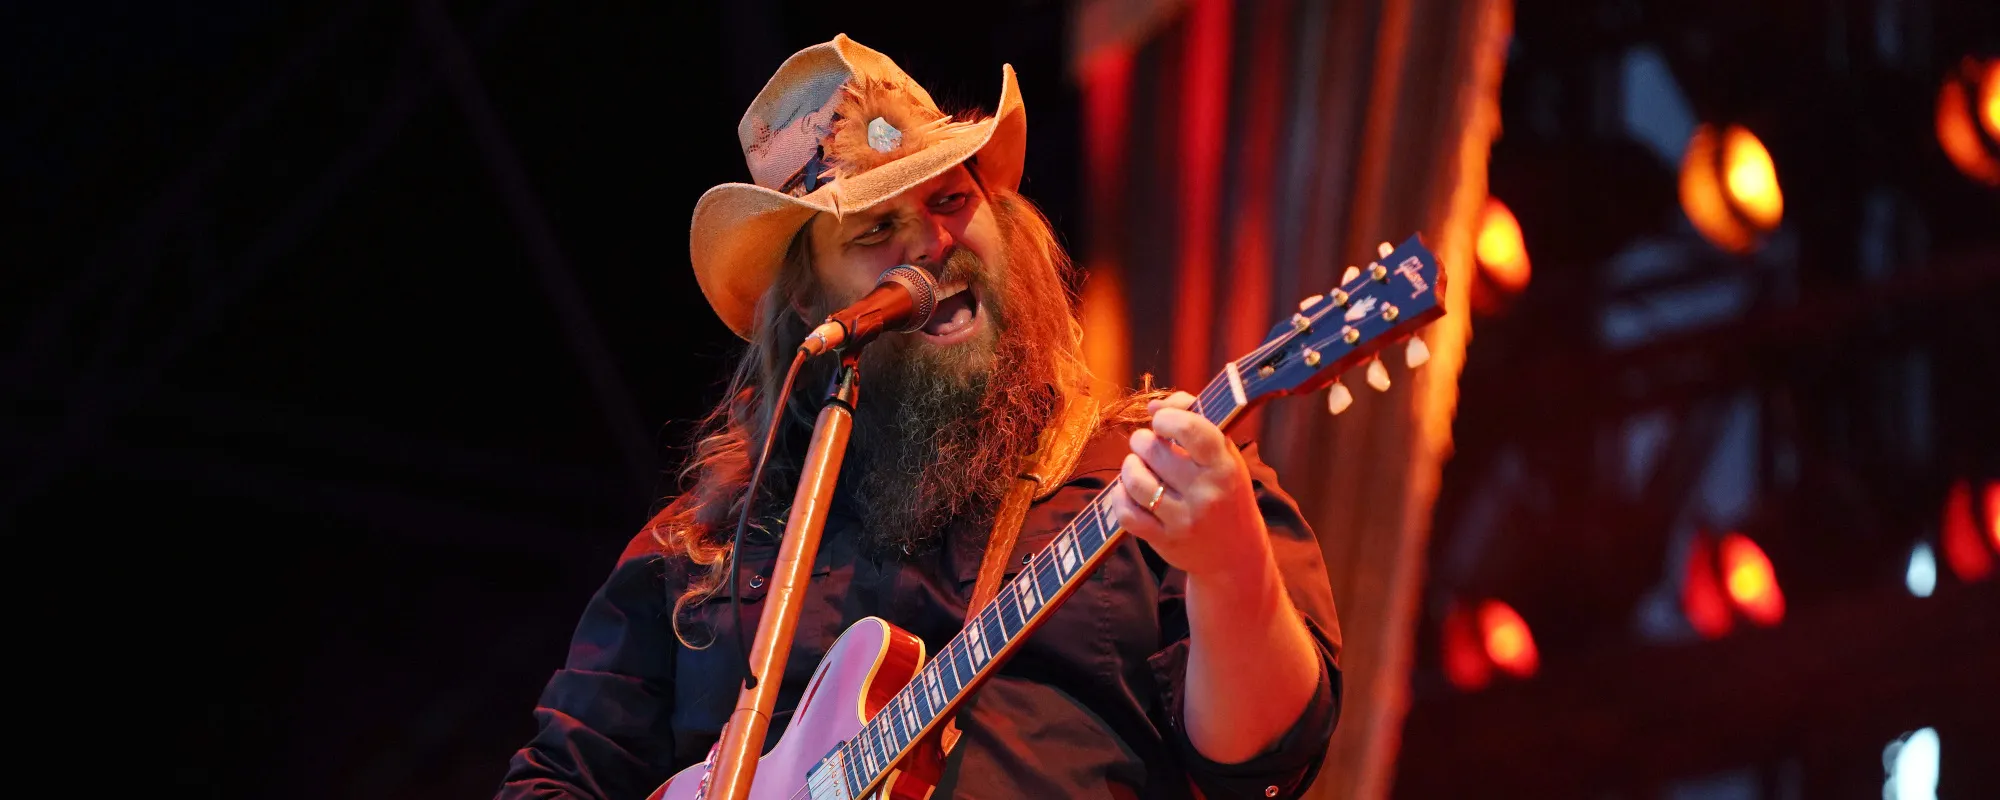 Chris Stapleton Shares New Track “It Takes a Woman” from Forthcoming Album ‘Higher’ Out in November